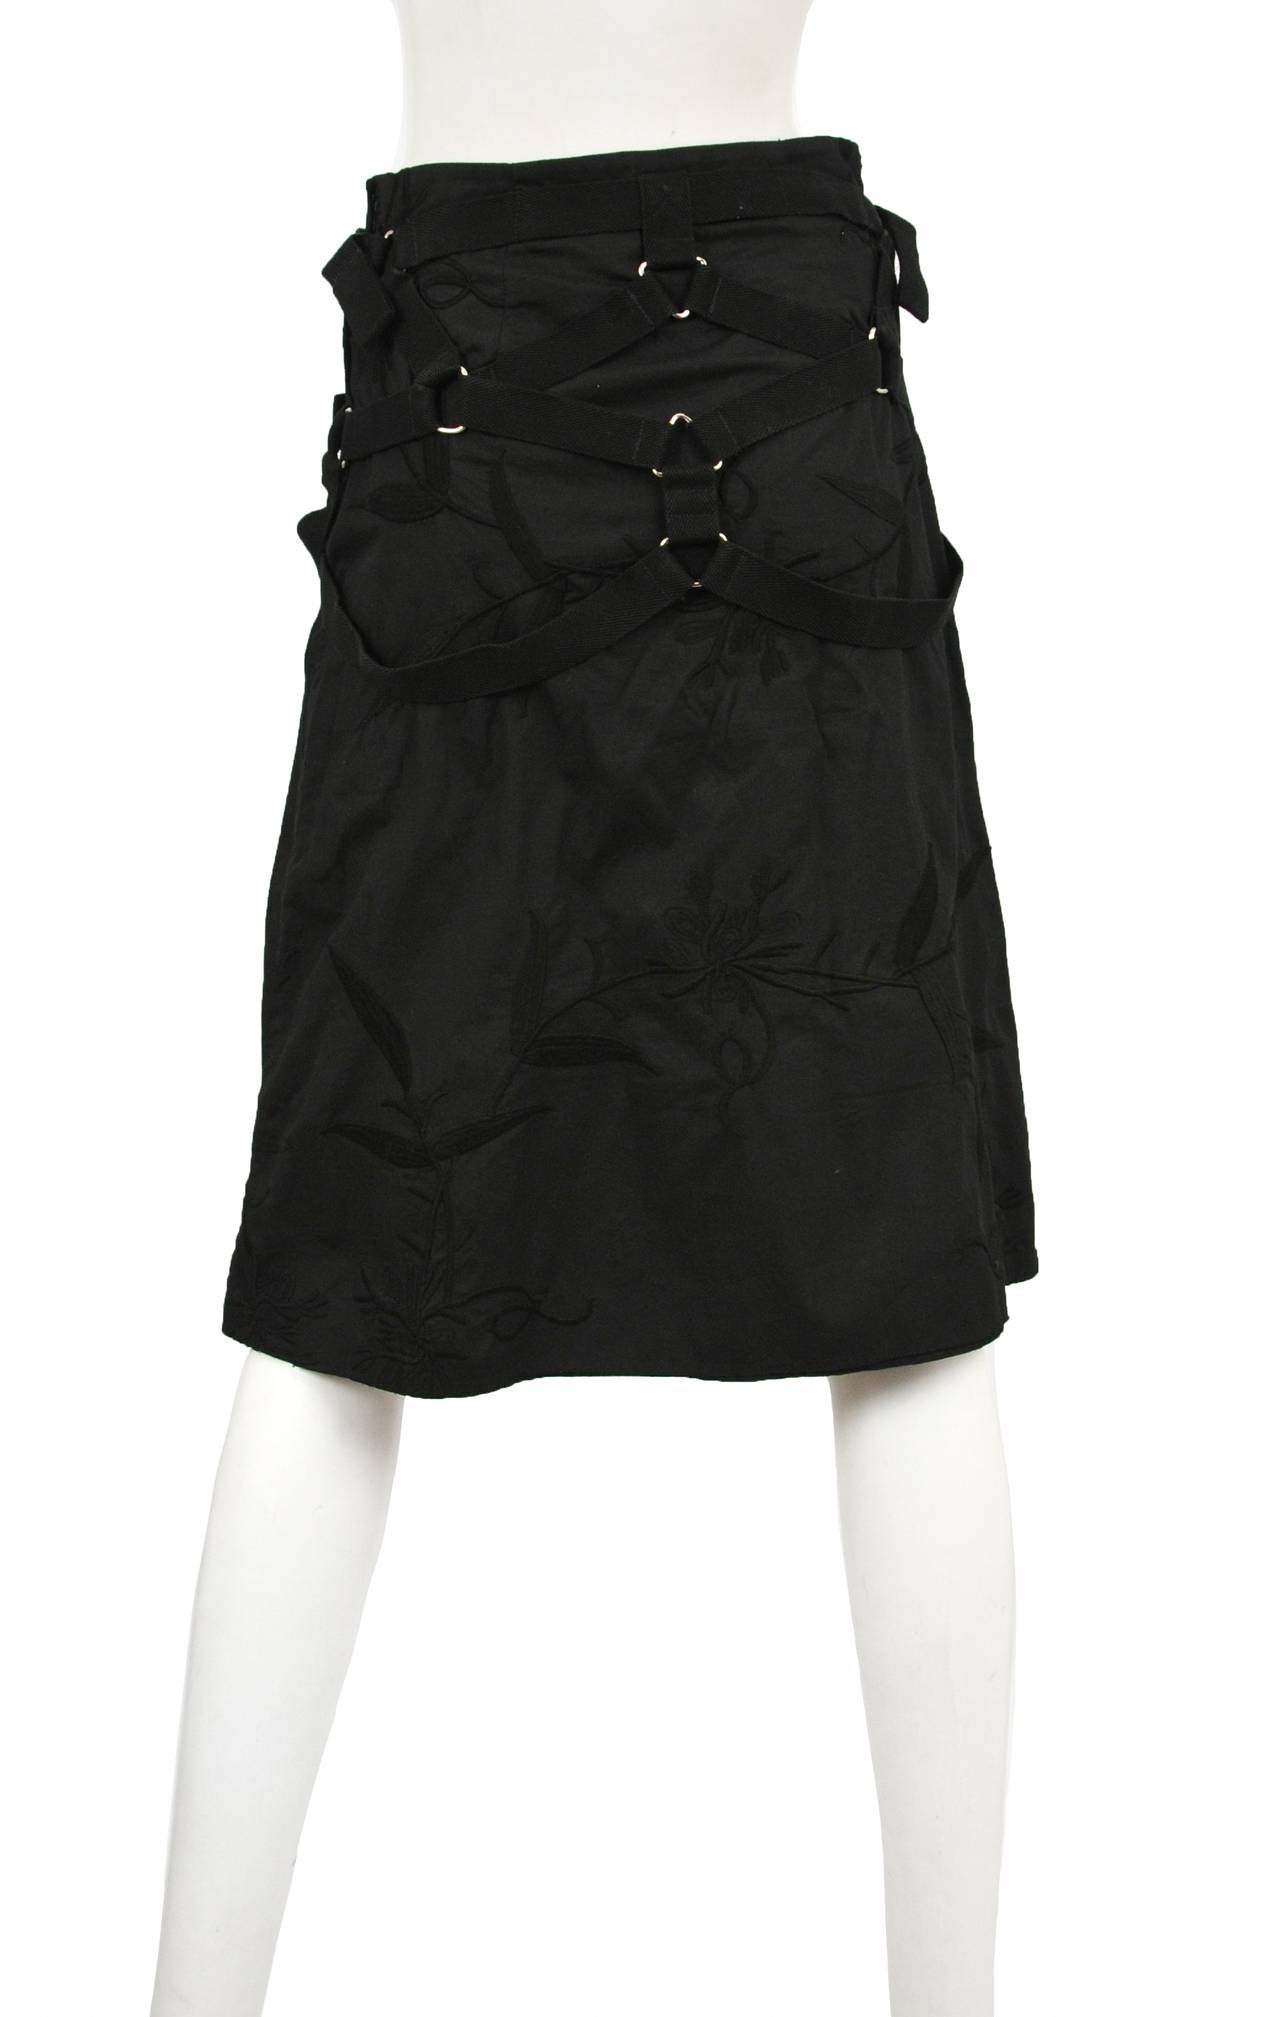 Vintage Junya Watanabe for Comme des Garcons black on black embroidered parachute knee length skirt with black trim and metal and black plastic hardware. Circa 2002.